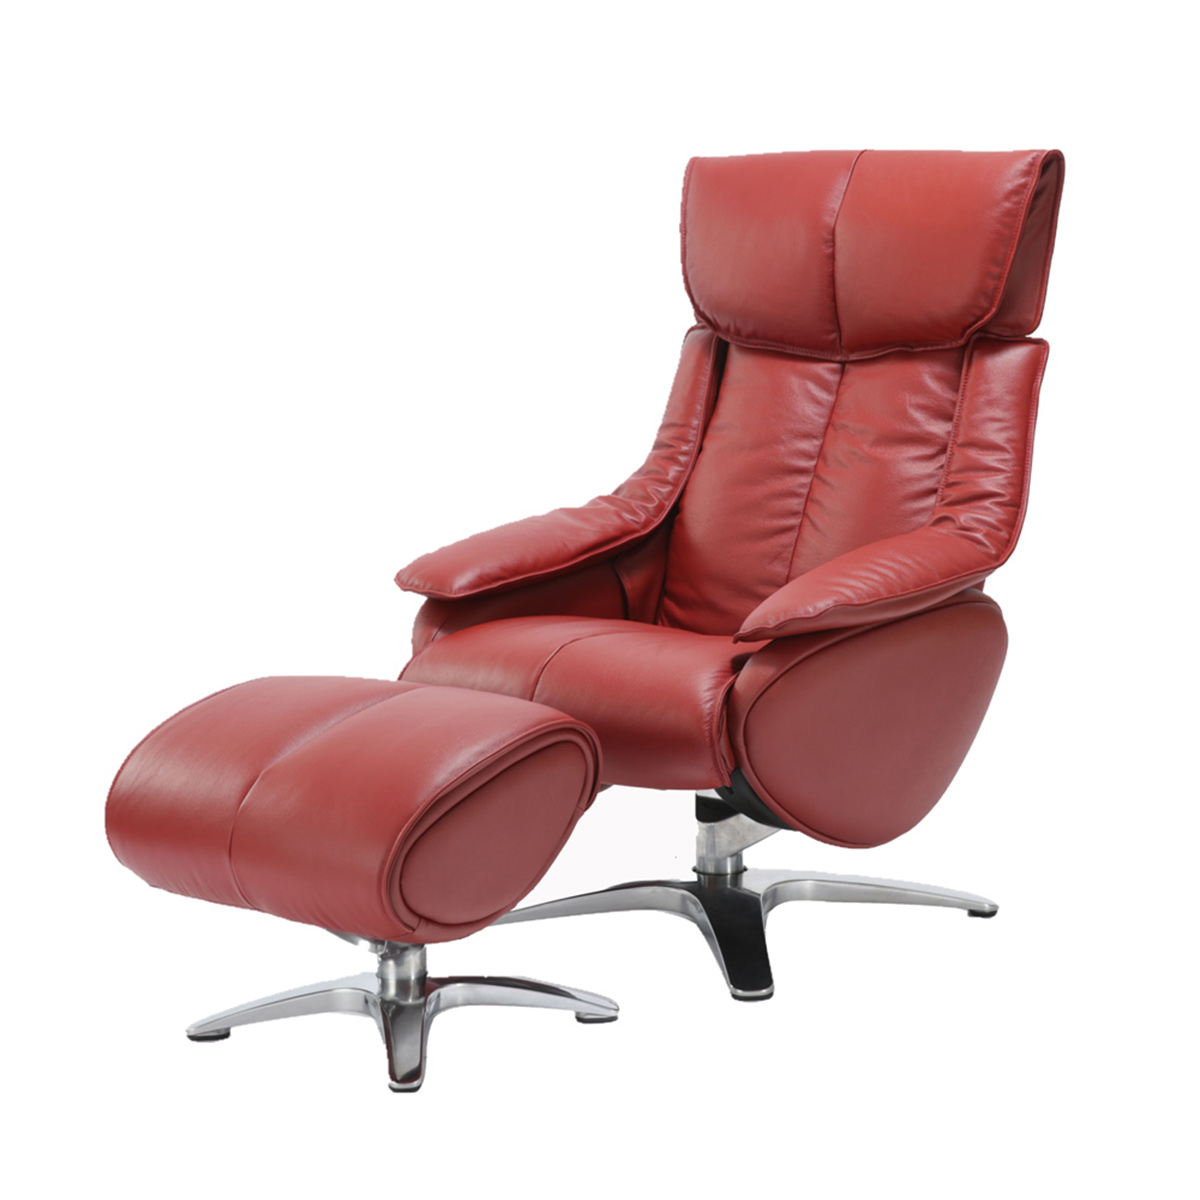 Barcalounger Eton Pedestal Recliner Chair with Adjustable Head Rest and Adjustable Ottoman - Capri Red/leather match